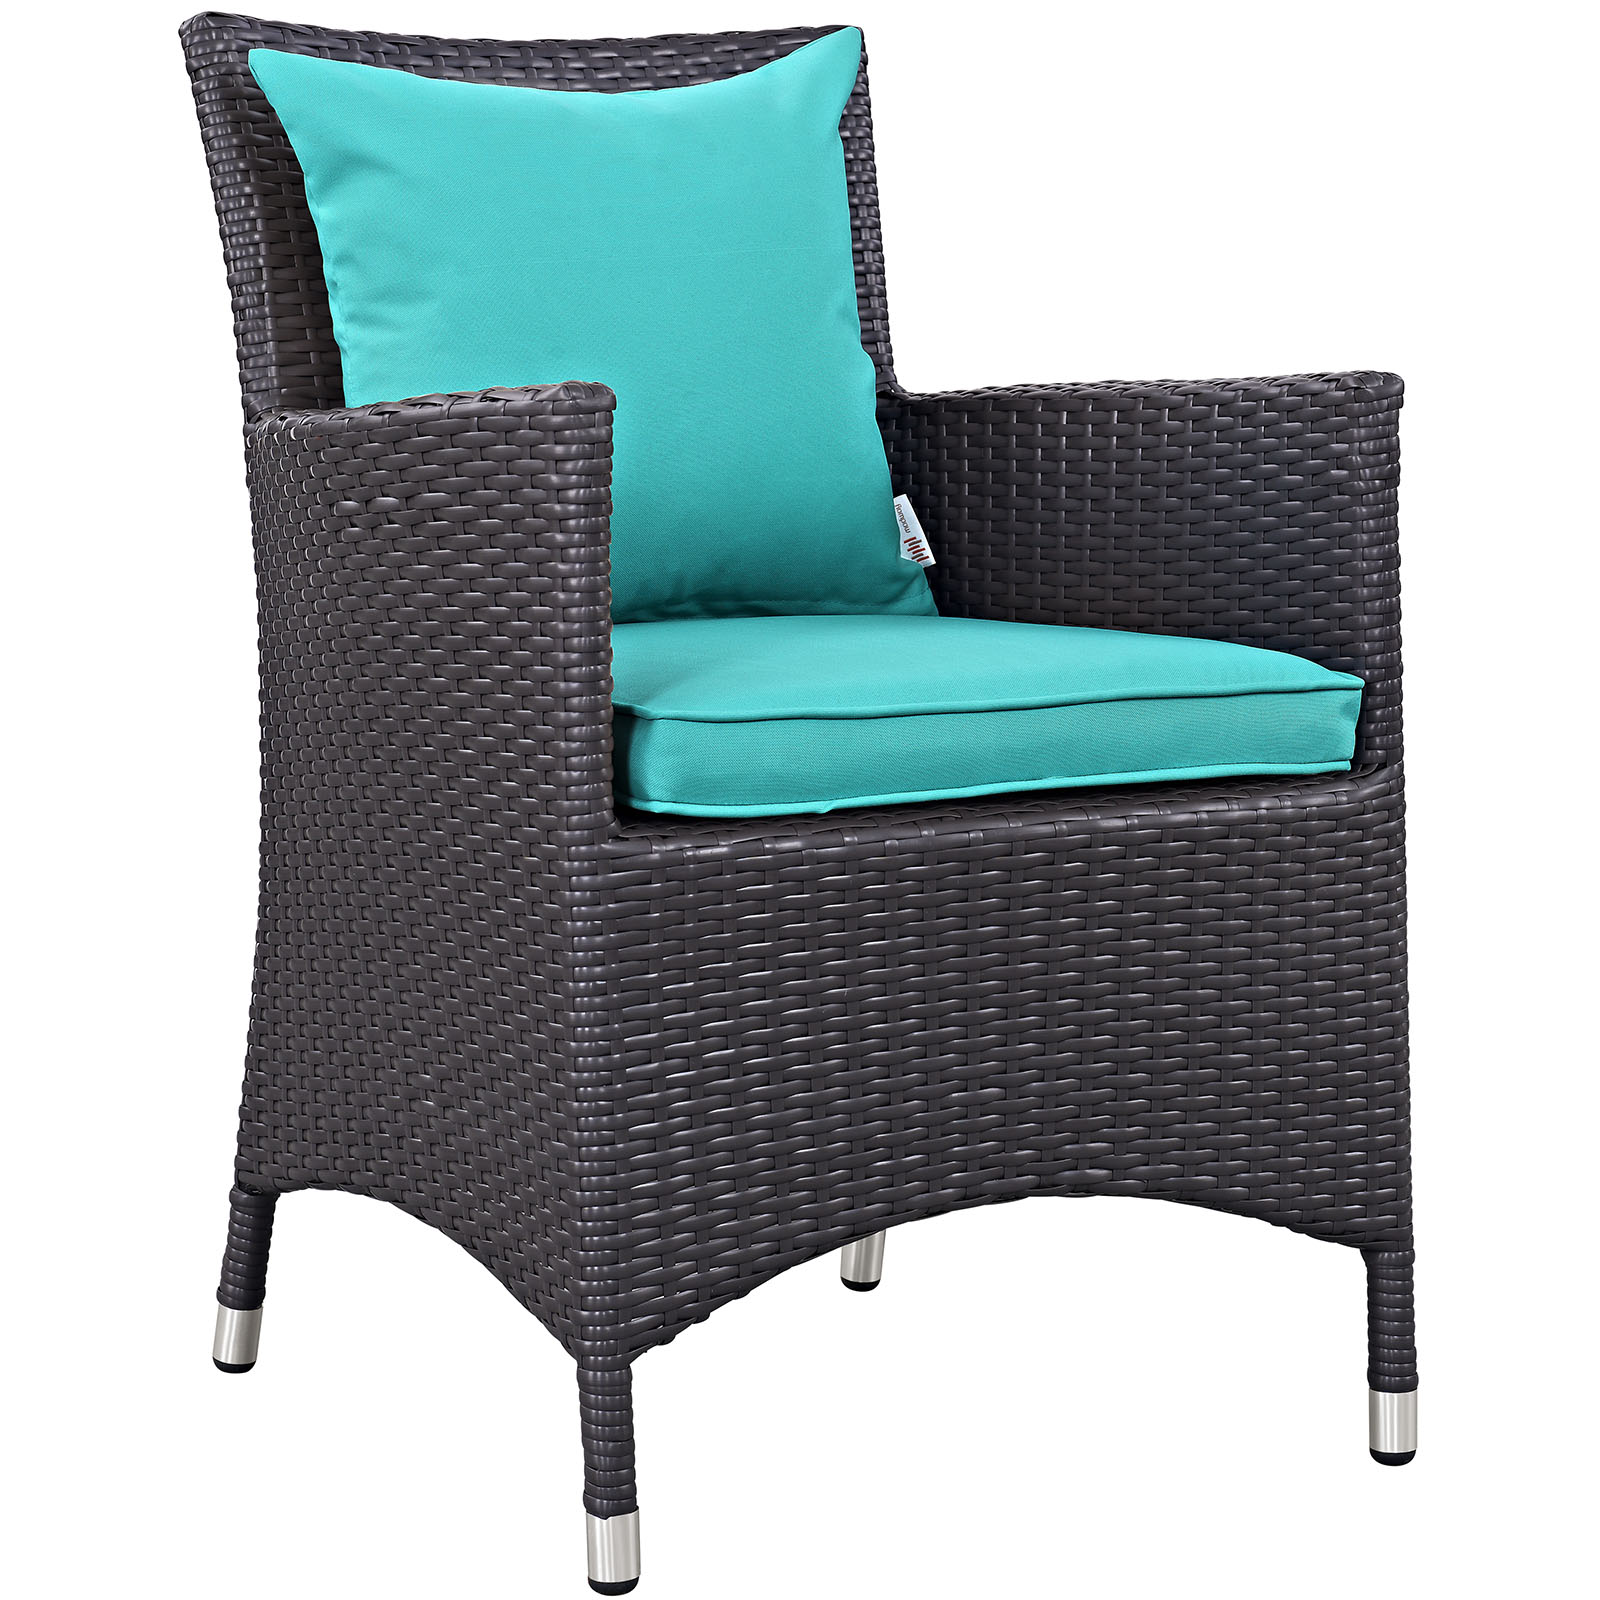 Modway Convene 8 Piece Outdoor Patio Dining Set in Espresso Turquoise - image 3 of 6